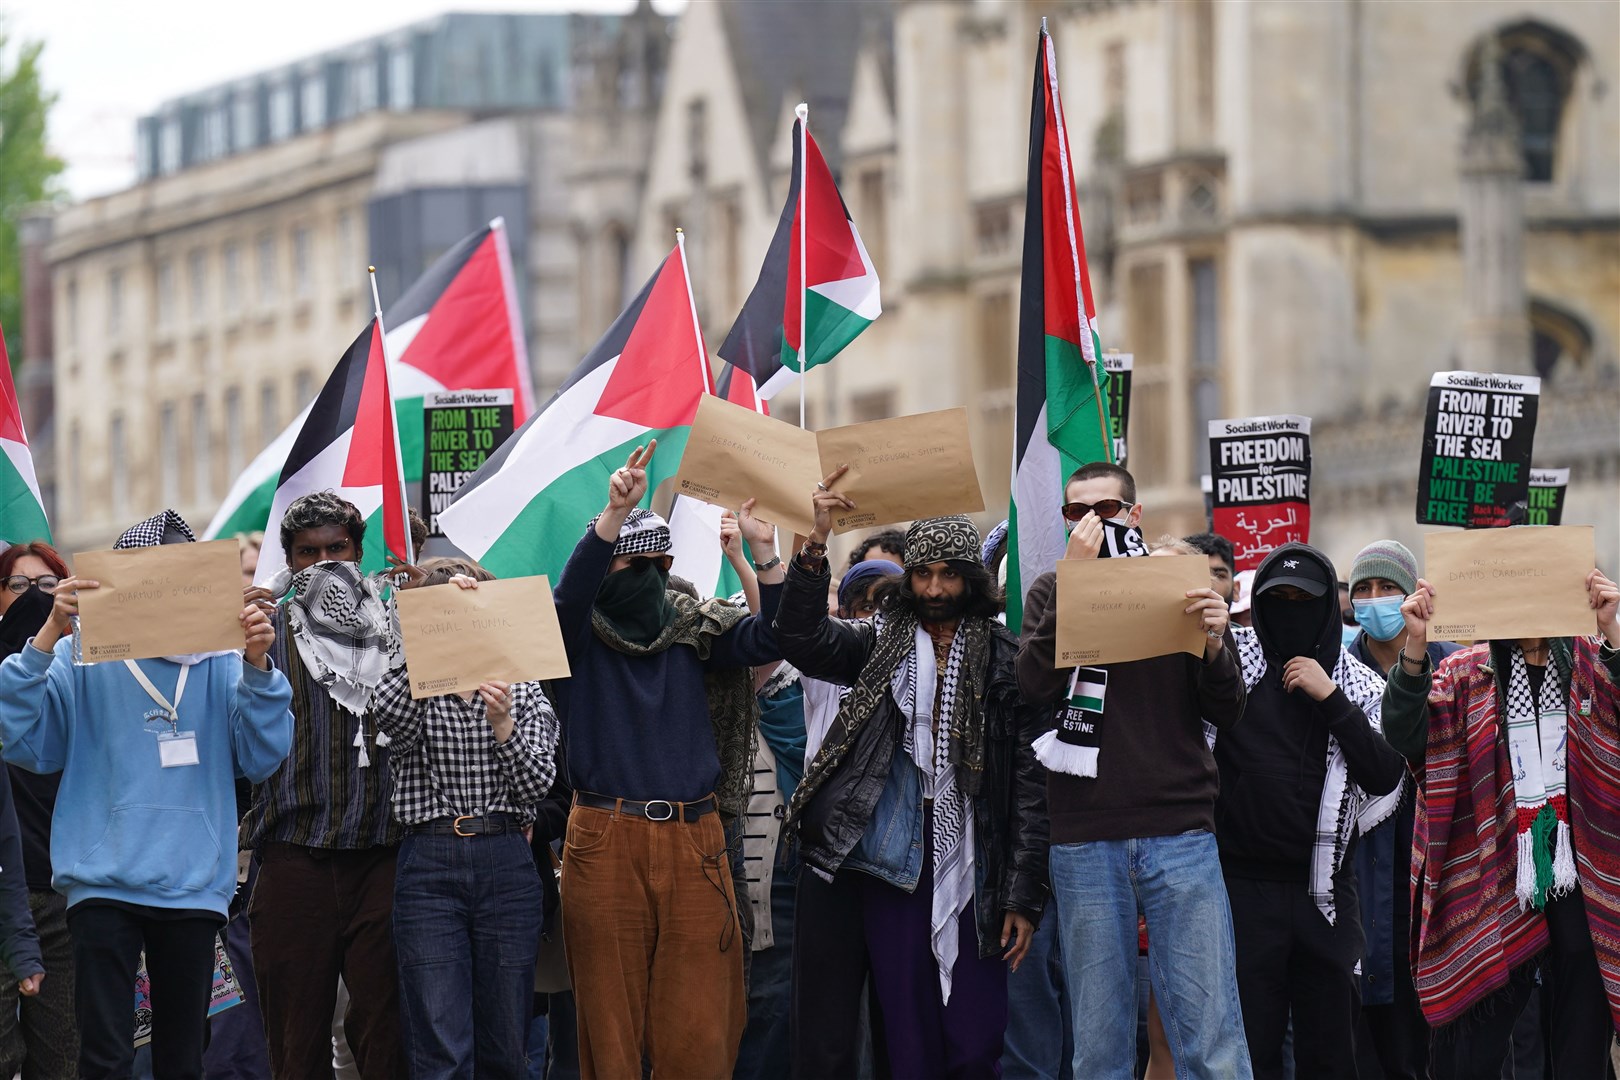 Students staged a march as part of their calls for a Gaza ceasefire at Cambridge University on Tuesday (Joe Giddens/PA)